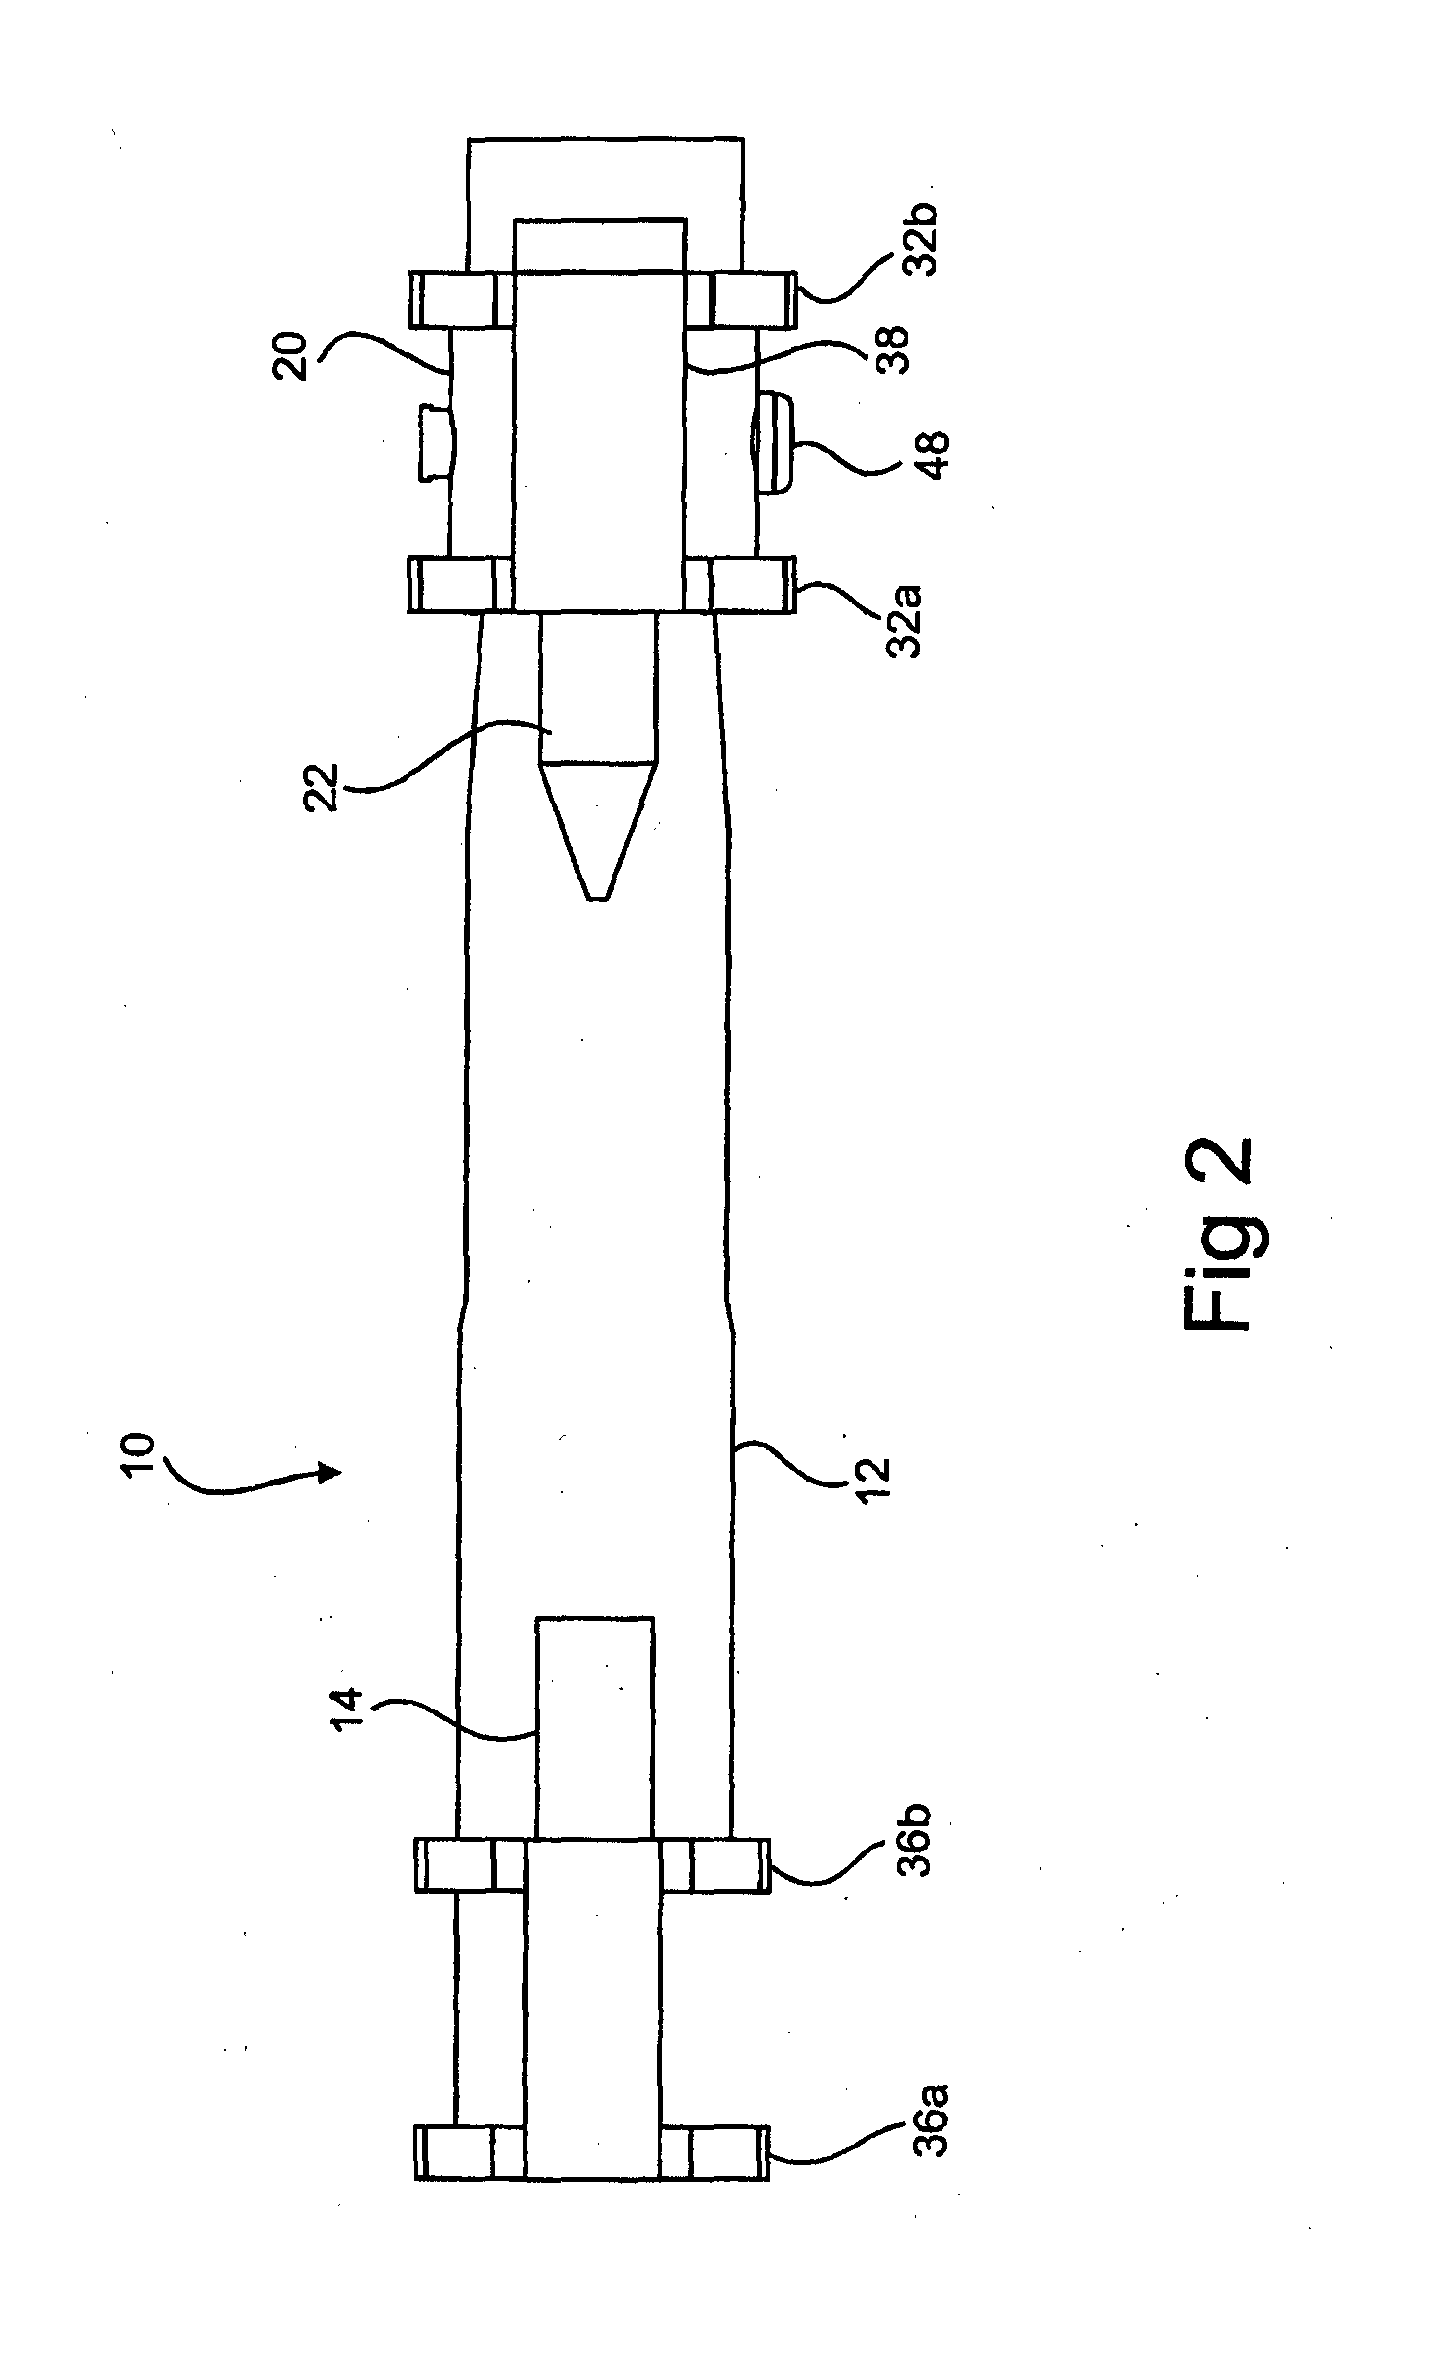 Flange catching, aligning and closing tool